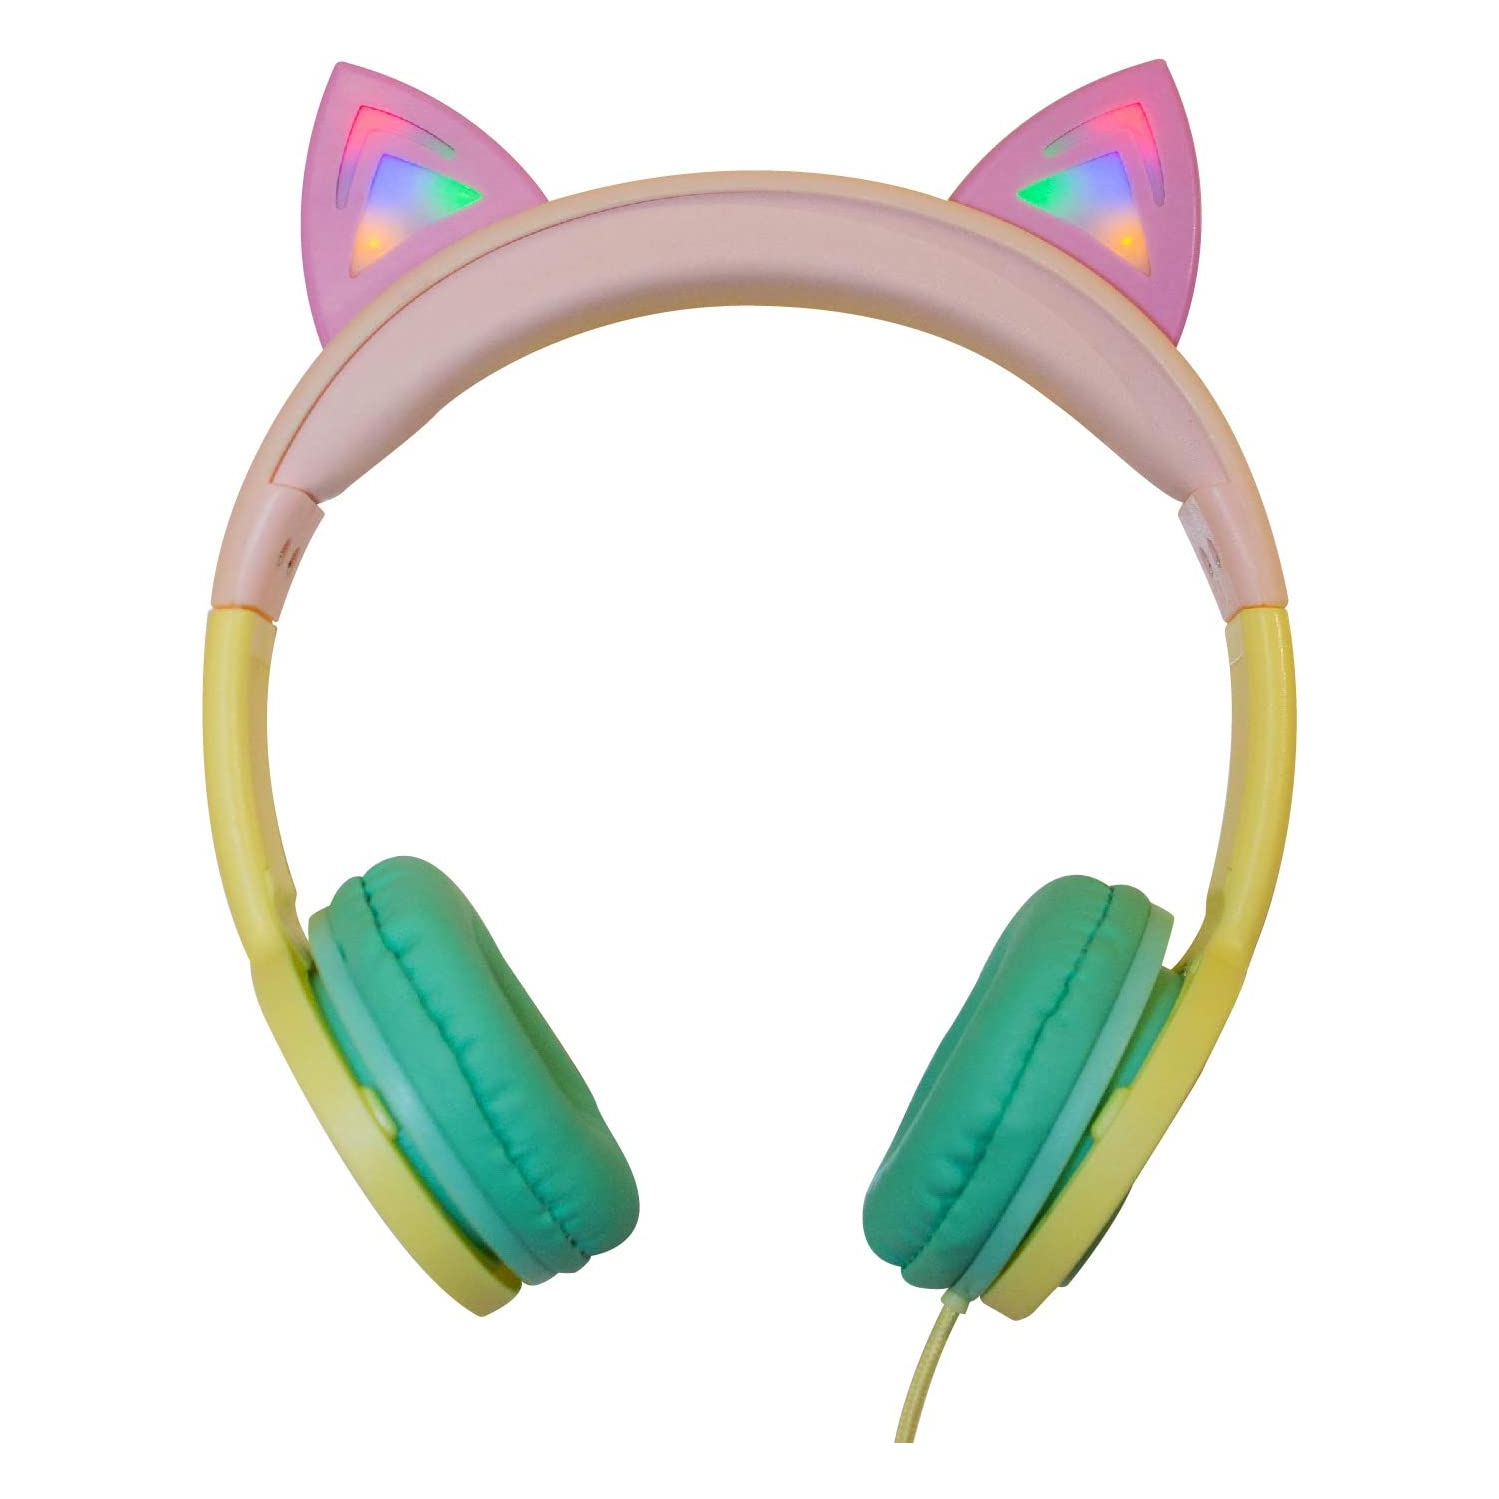 Gabba Goods Premium Kid's/Children's Safe Sound LED Light Up in The Dark Cat Over The Ear Comfort Padded Stereo Headphones with AUX Cable | Earphones - 85 Decibels(Rainbow)